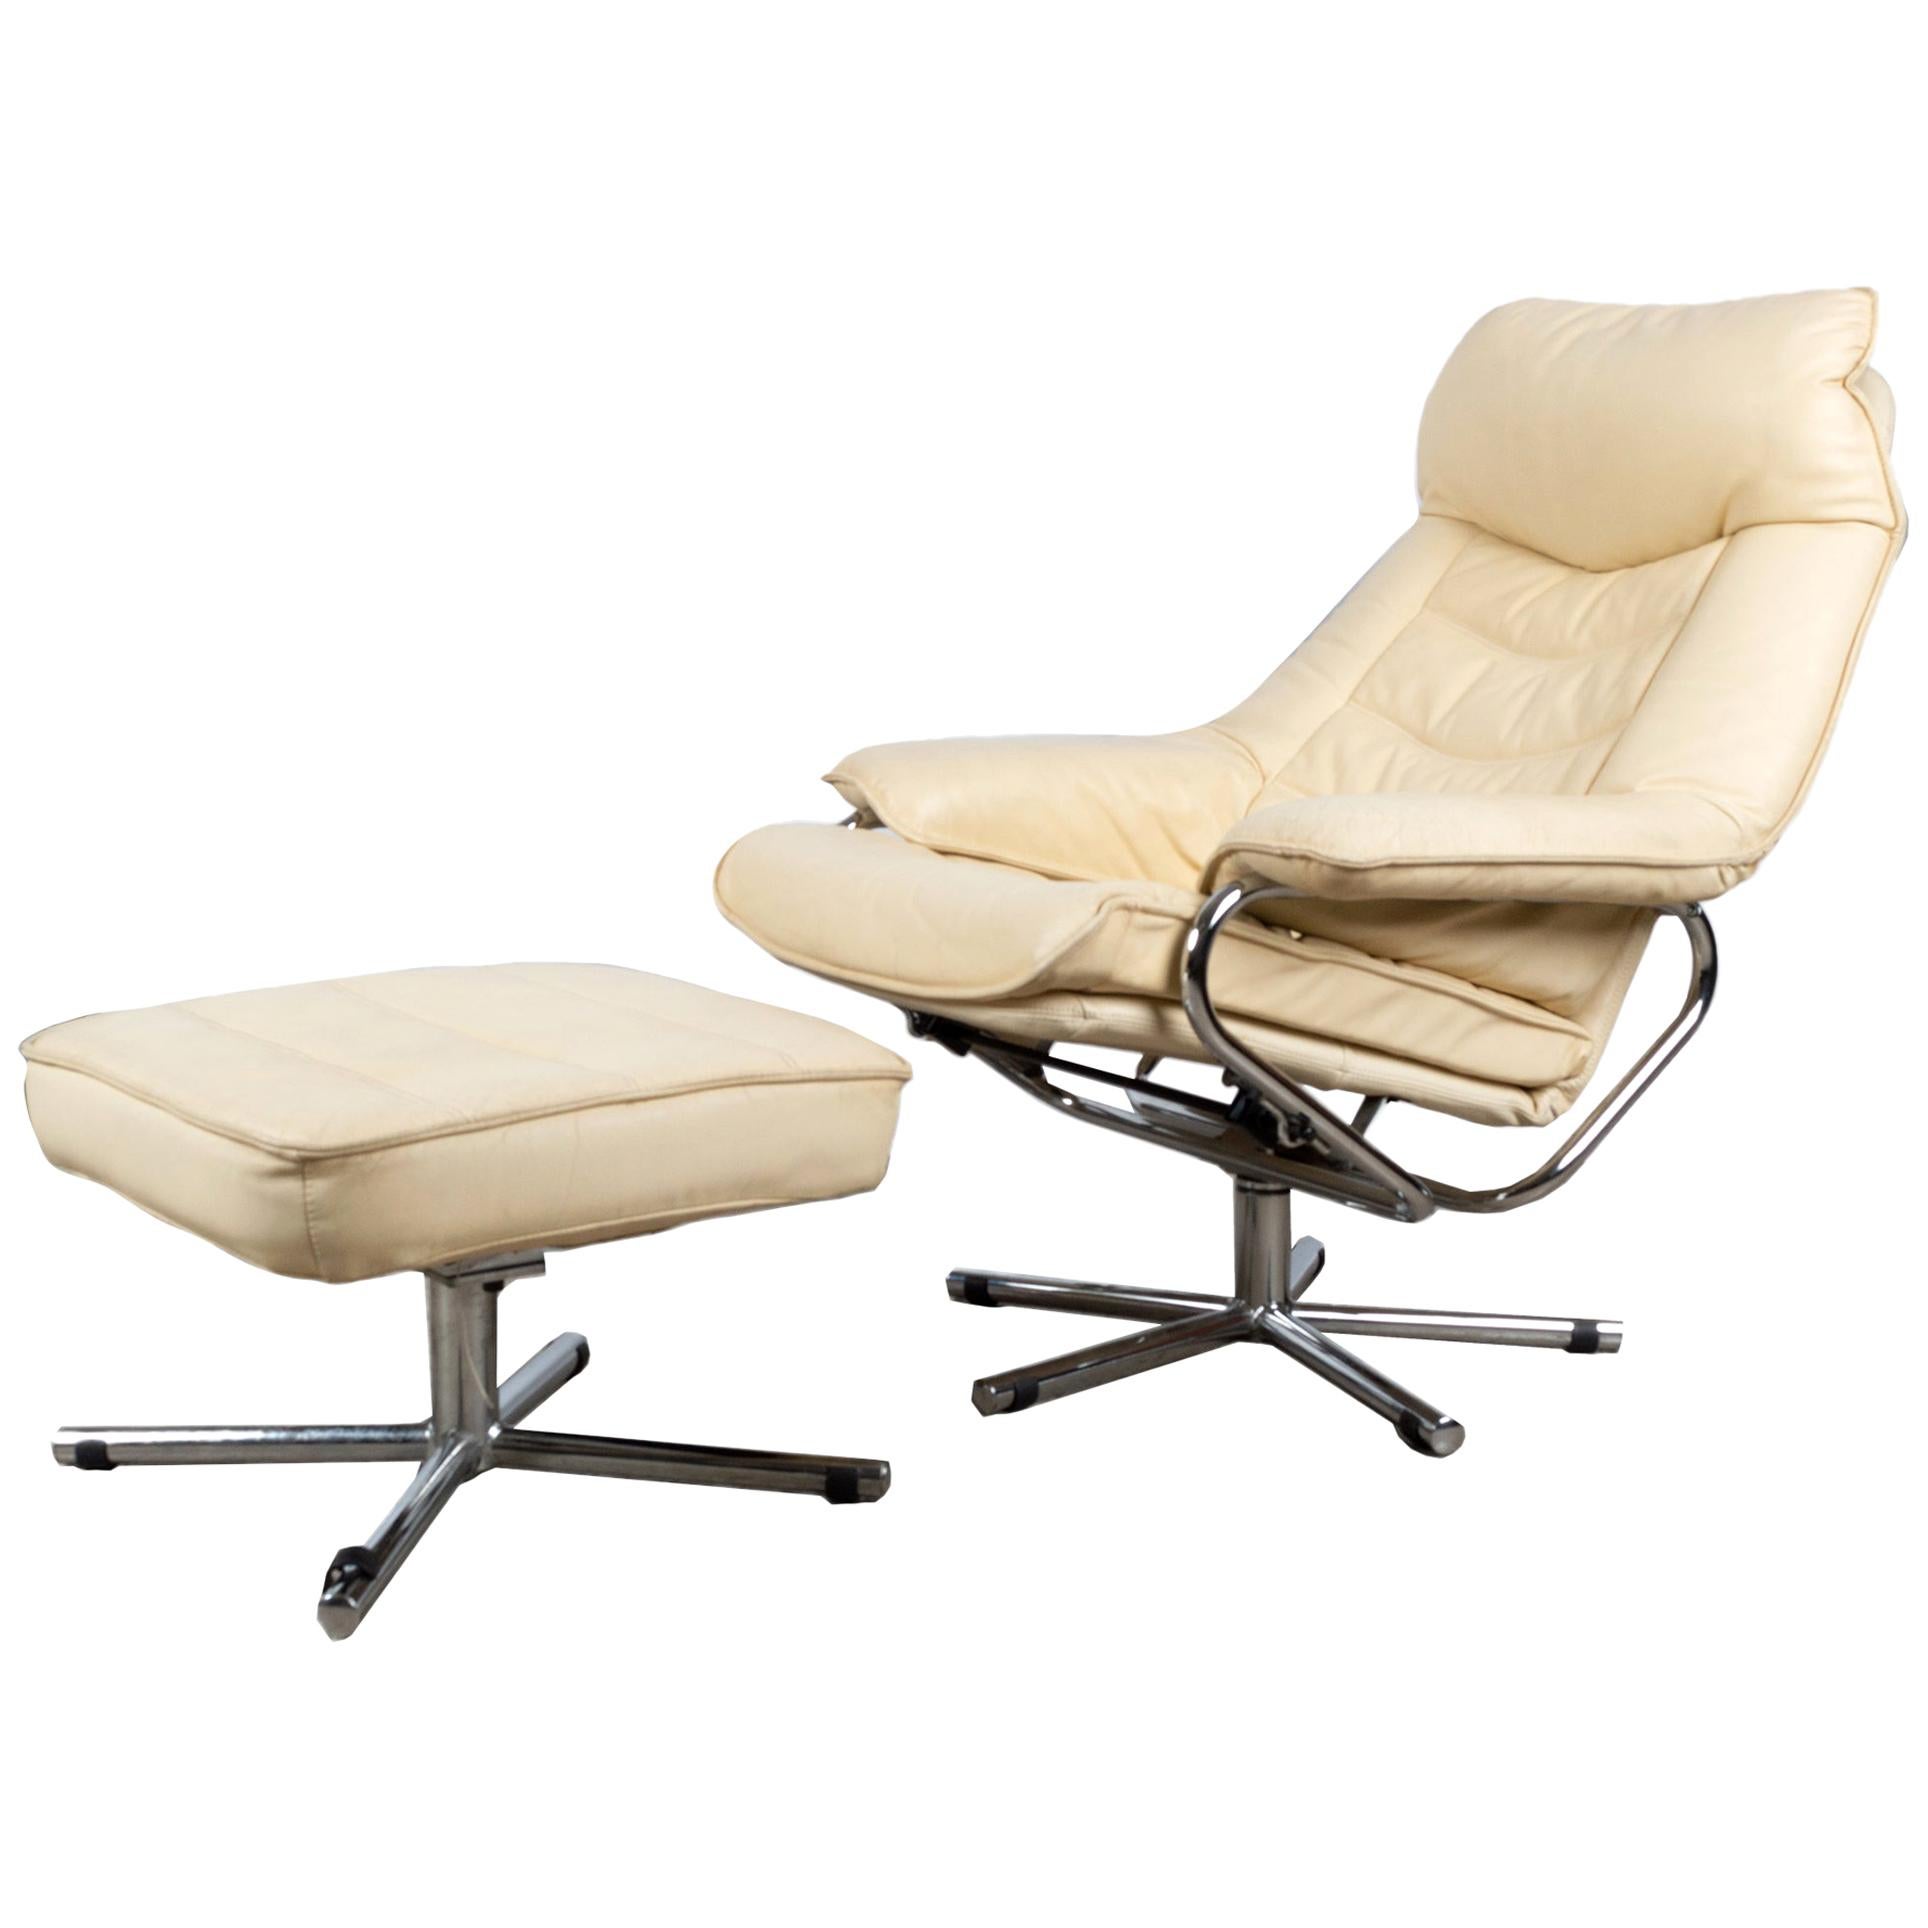 Leather Reclining Swivel Lounge Chair with Ottoman by Tetrad, England circa 1970